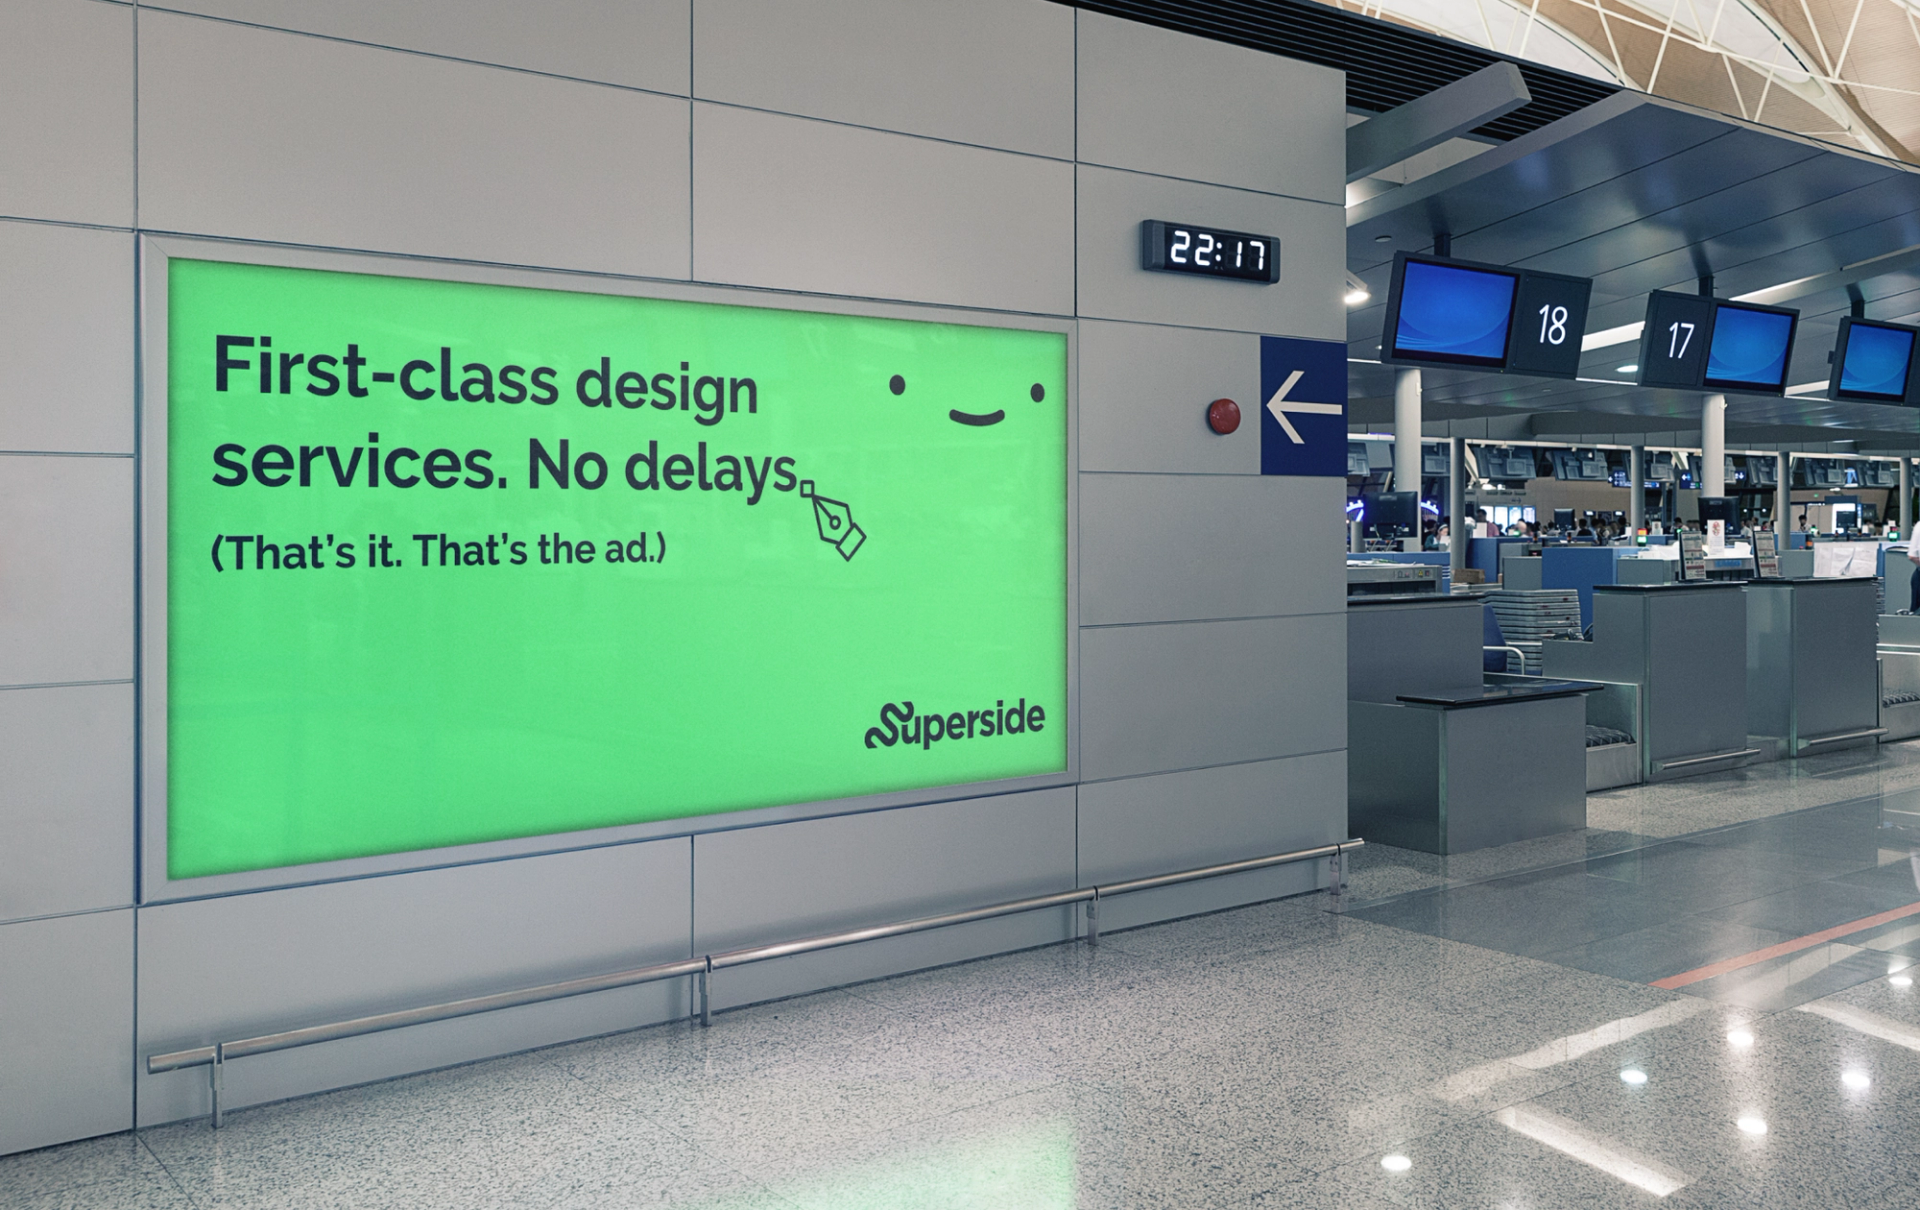 A poster advertising Superside in an airport.